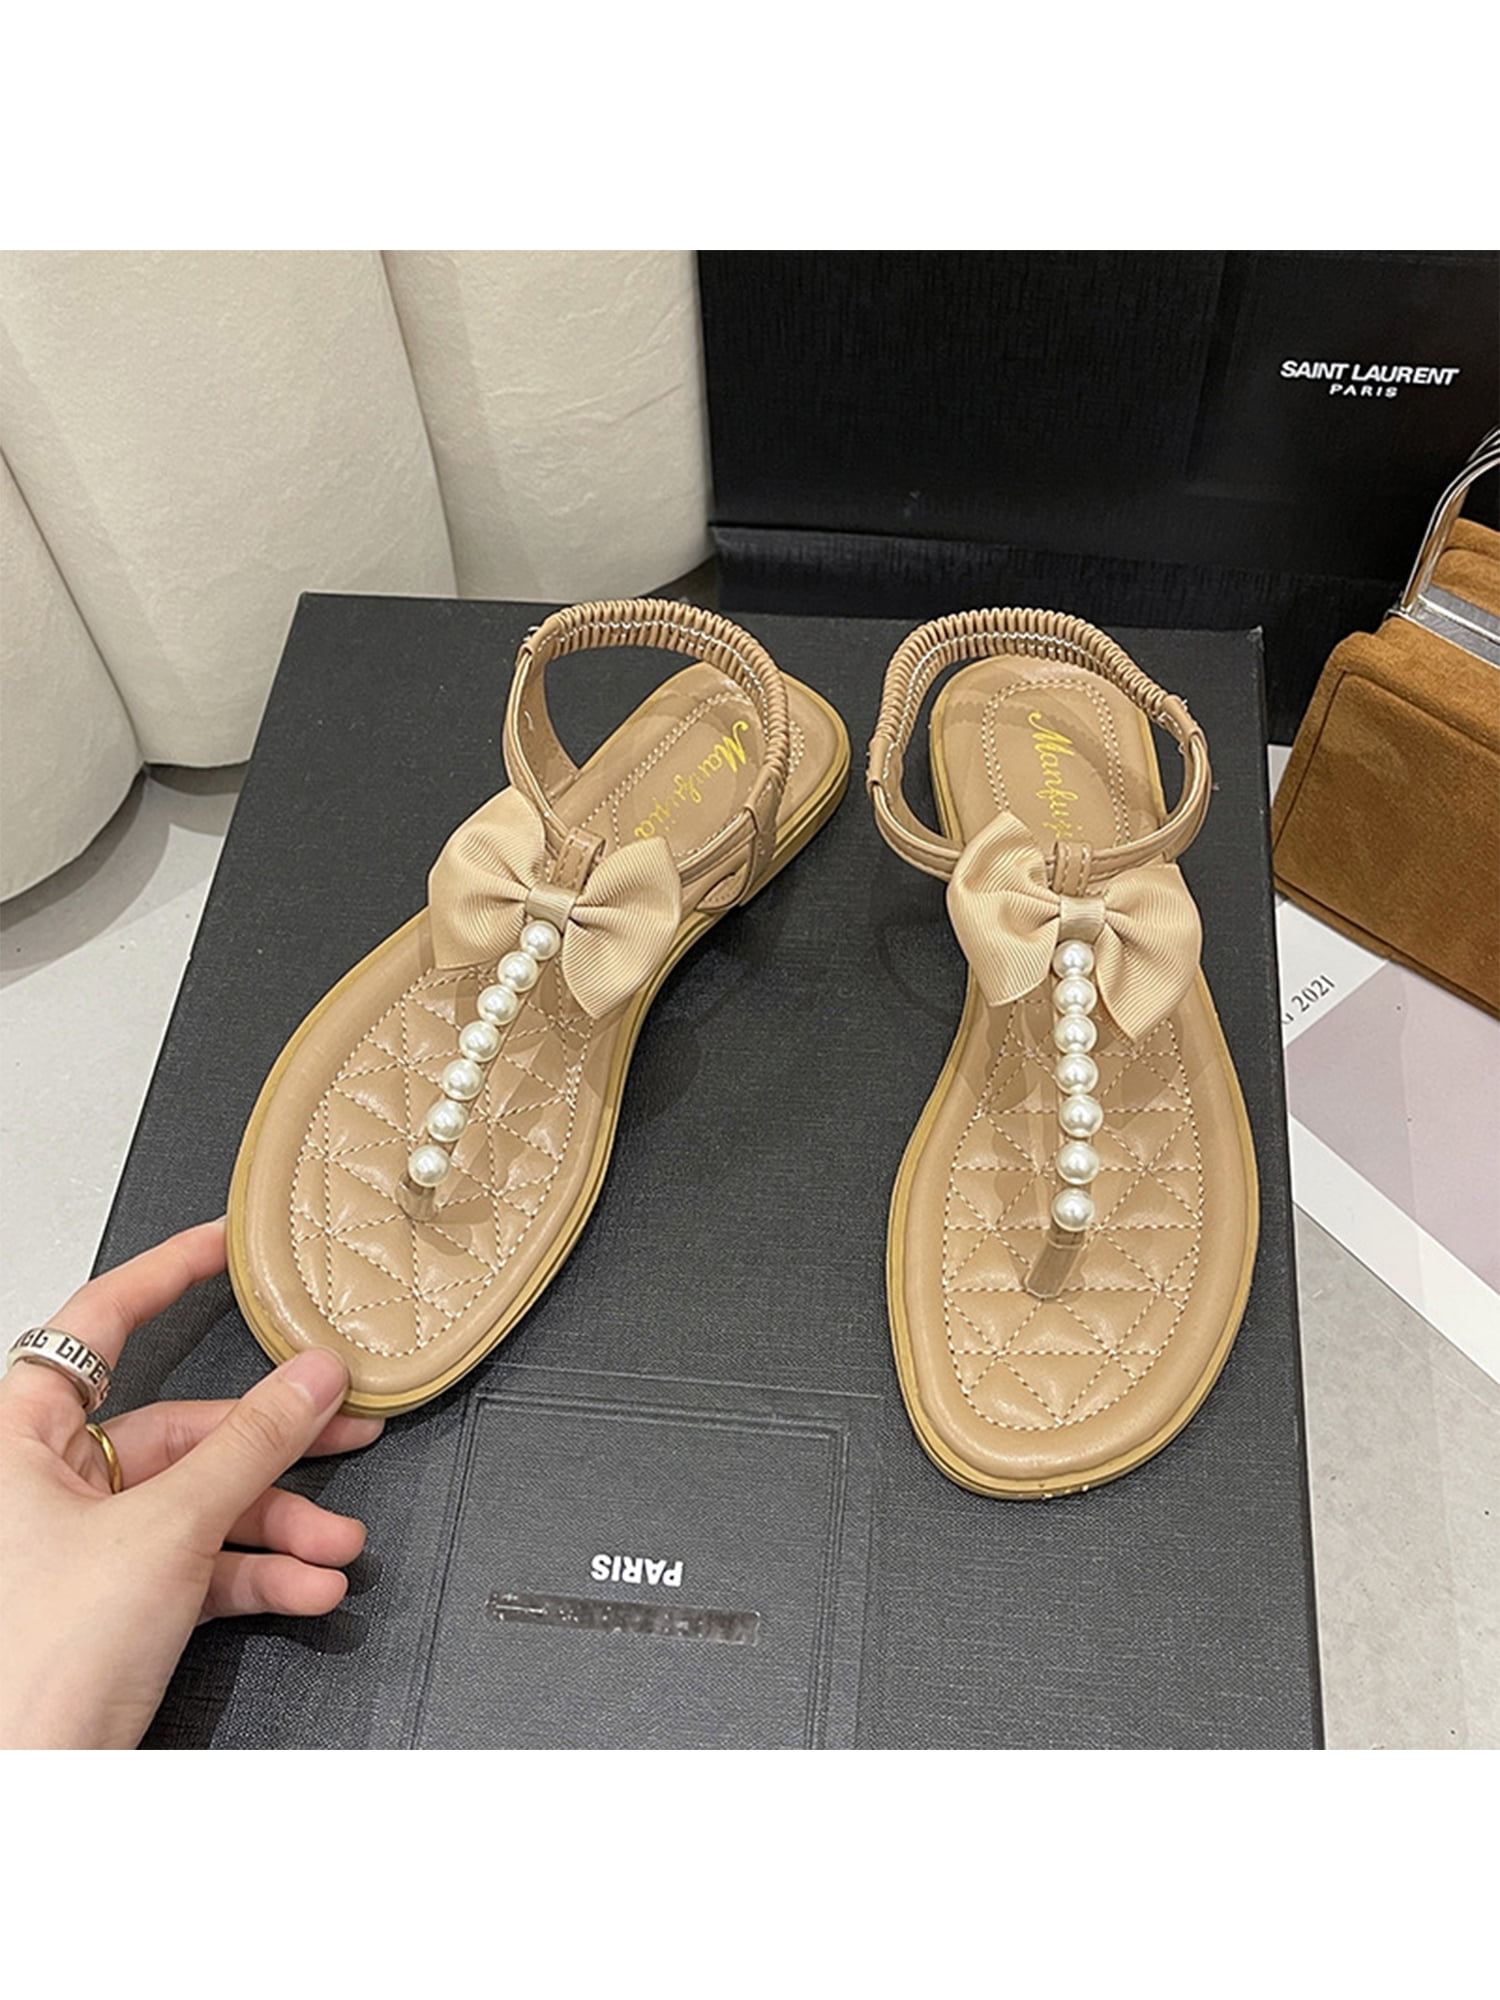 Appoi Clip Toe Sandals for Women Shiny Rhinestone Studed Flats Fashion Casual T-Strap Open Toe Flip Flop Sandals 